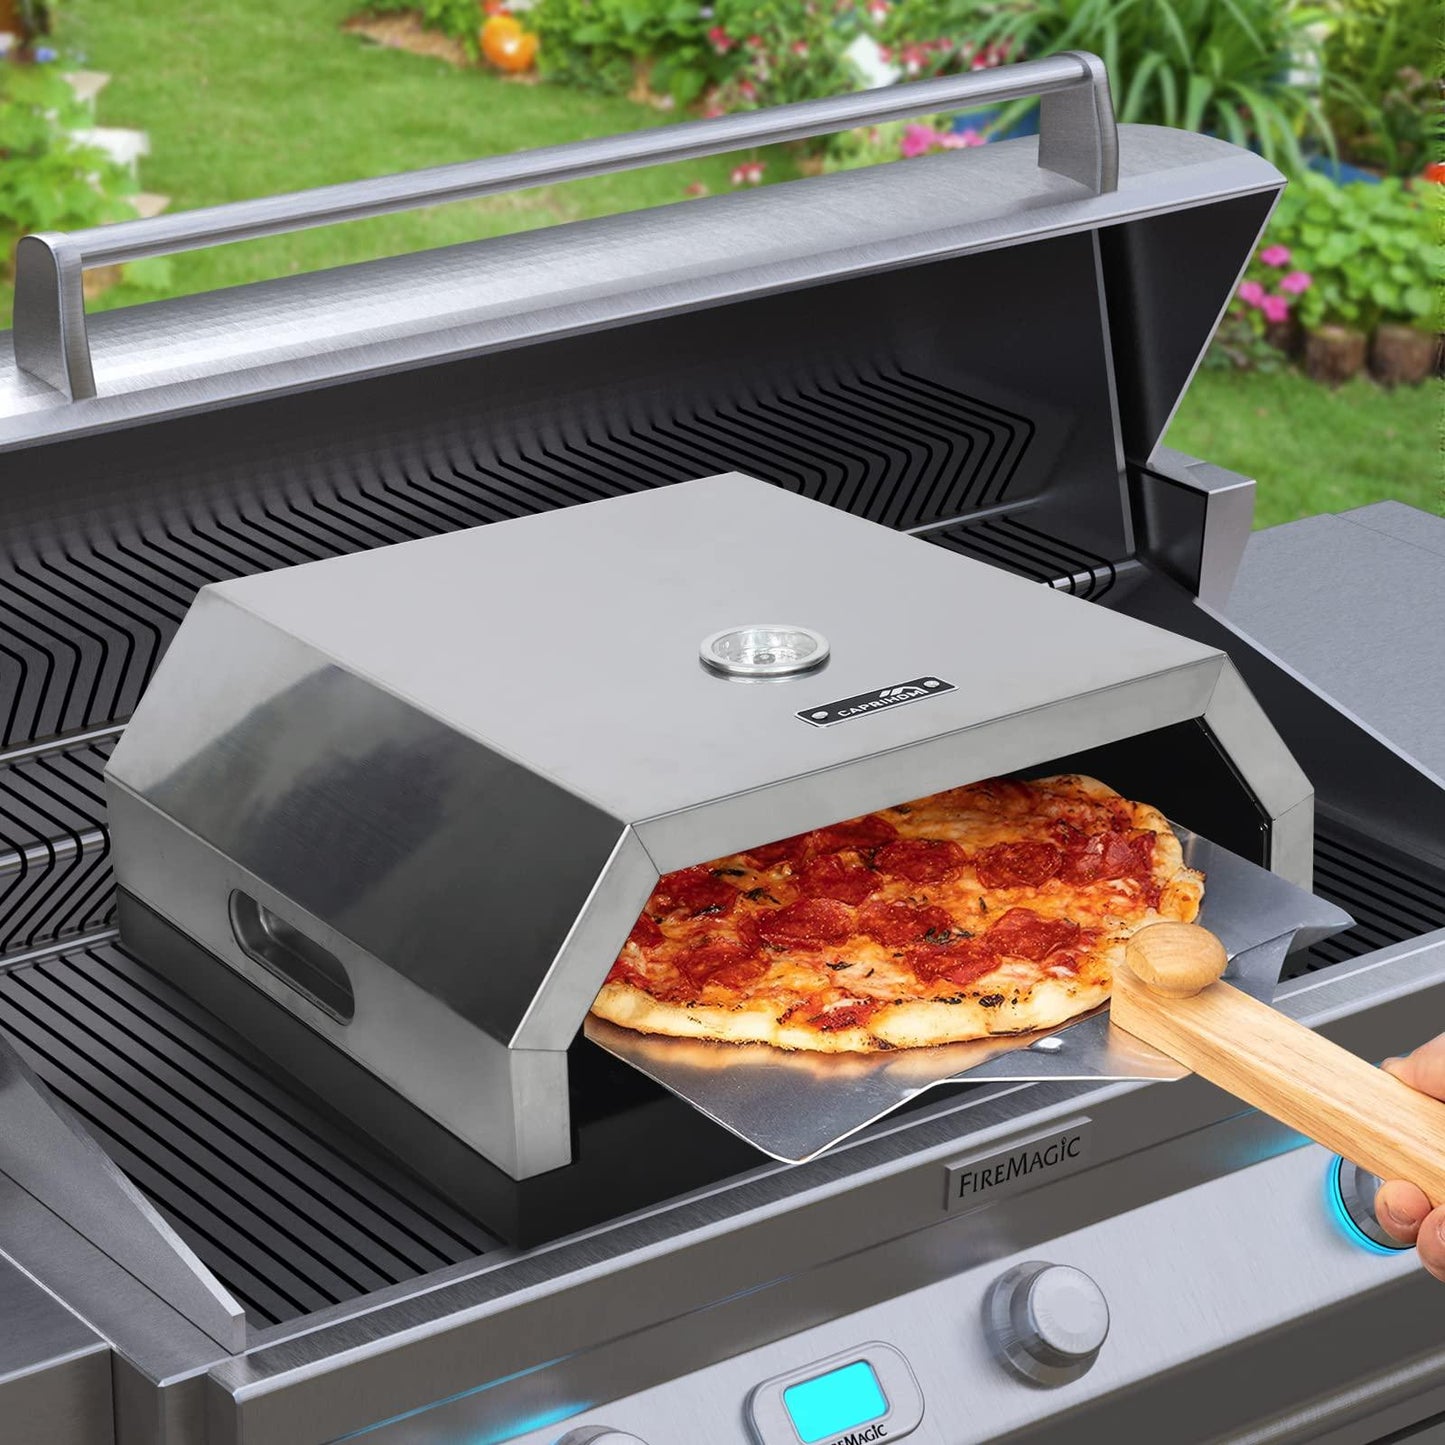 Caprihom Pizza Box for Grill - Portable Grill Top Pizza Oven with 12" Pizza Stone, Pizza Peel - Pizza Box for Charcoal Grill, Gas Grill - CookCave